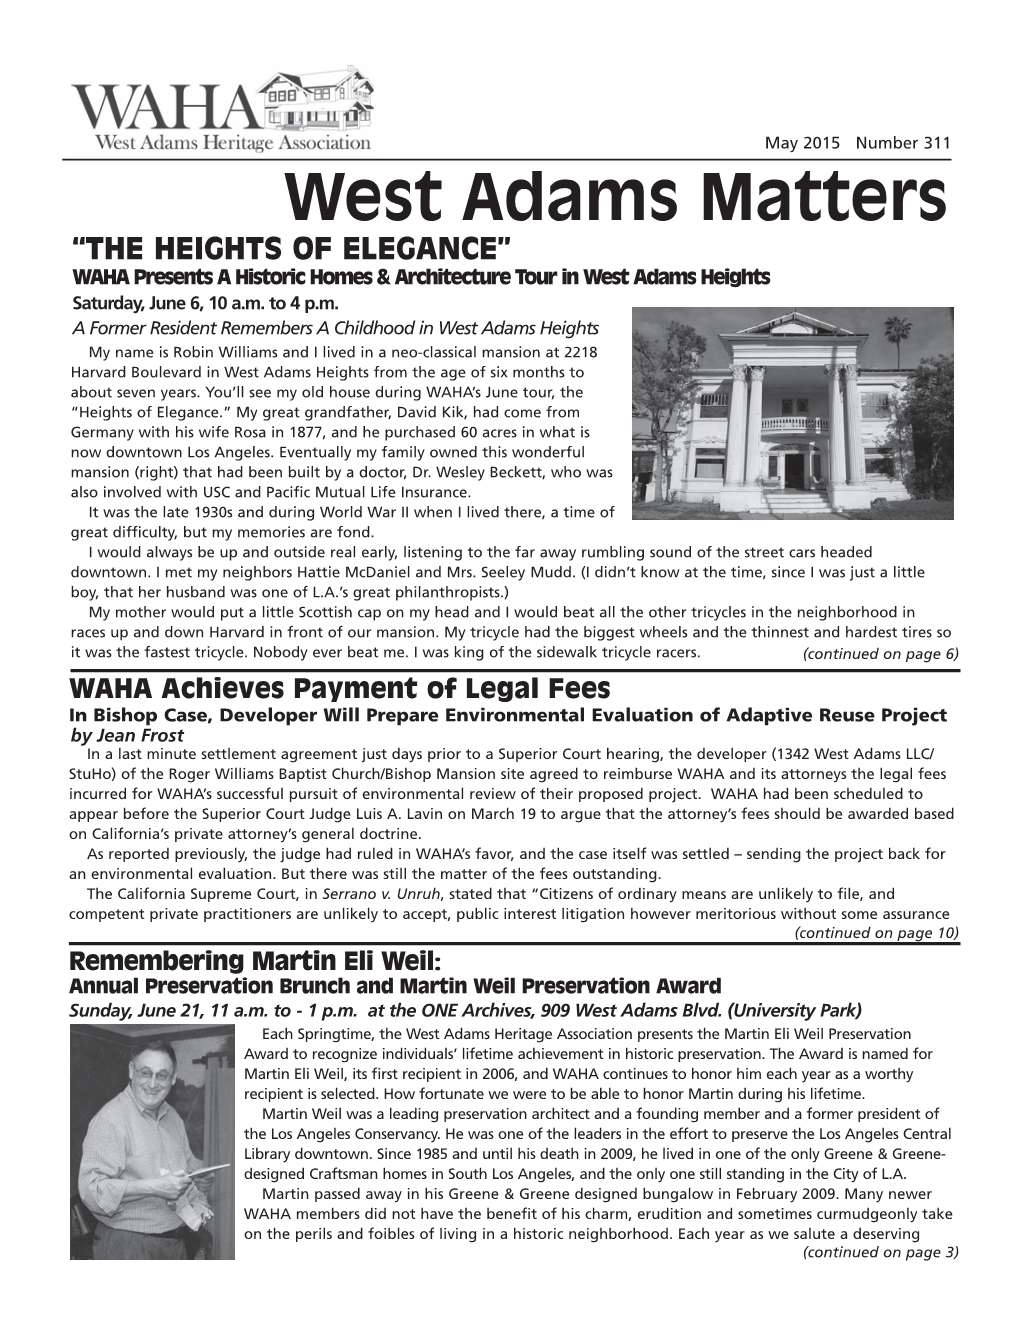 West Adams Matters “THE HEIGHTS of ELEGANCE” WAHA Presents a Historic Homes & Architecture Tour in West Adams Heights Saturday, June 6, 10 A.M